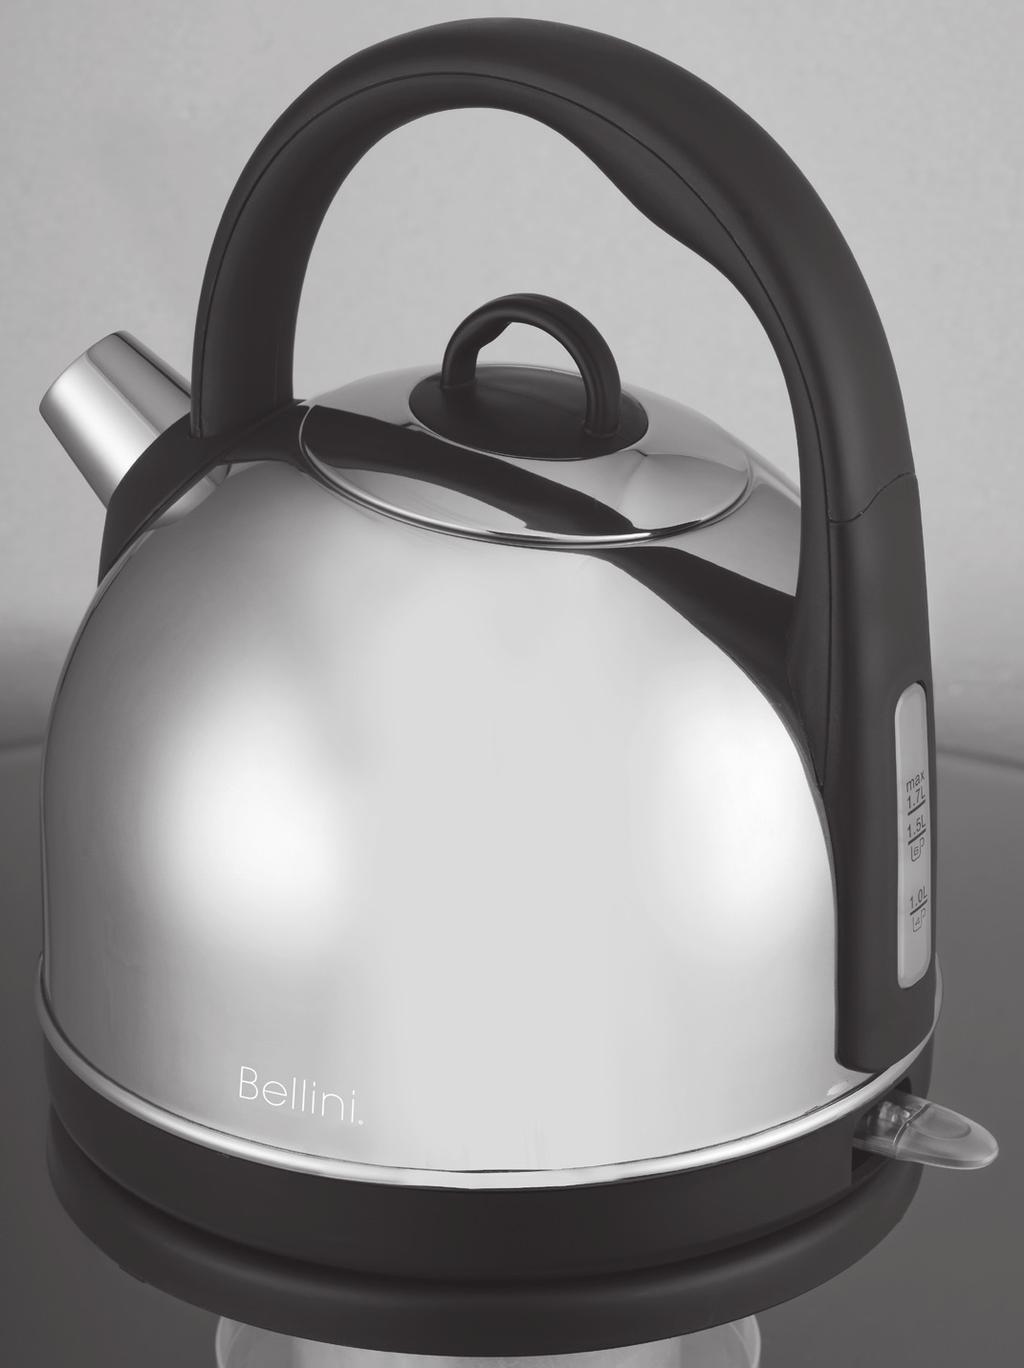 Features of Your Dome Kettle Easy-Grip Handle Scale Filter Spout